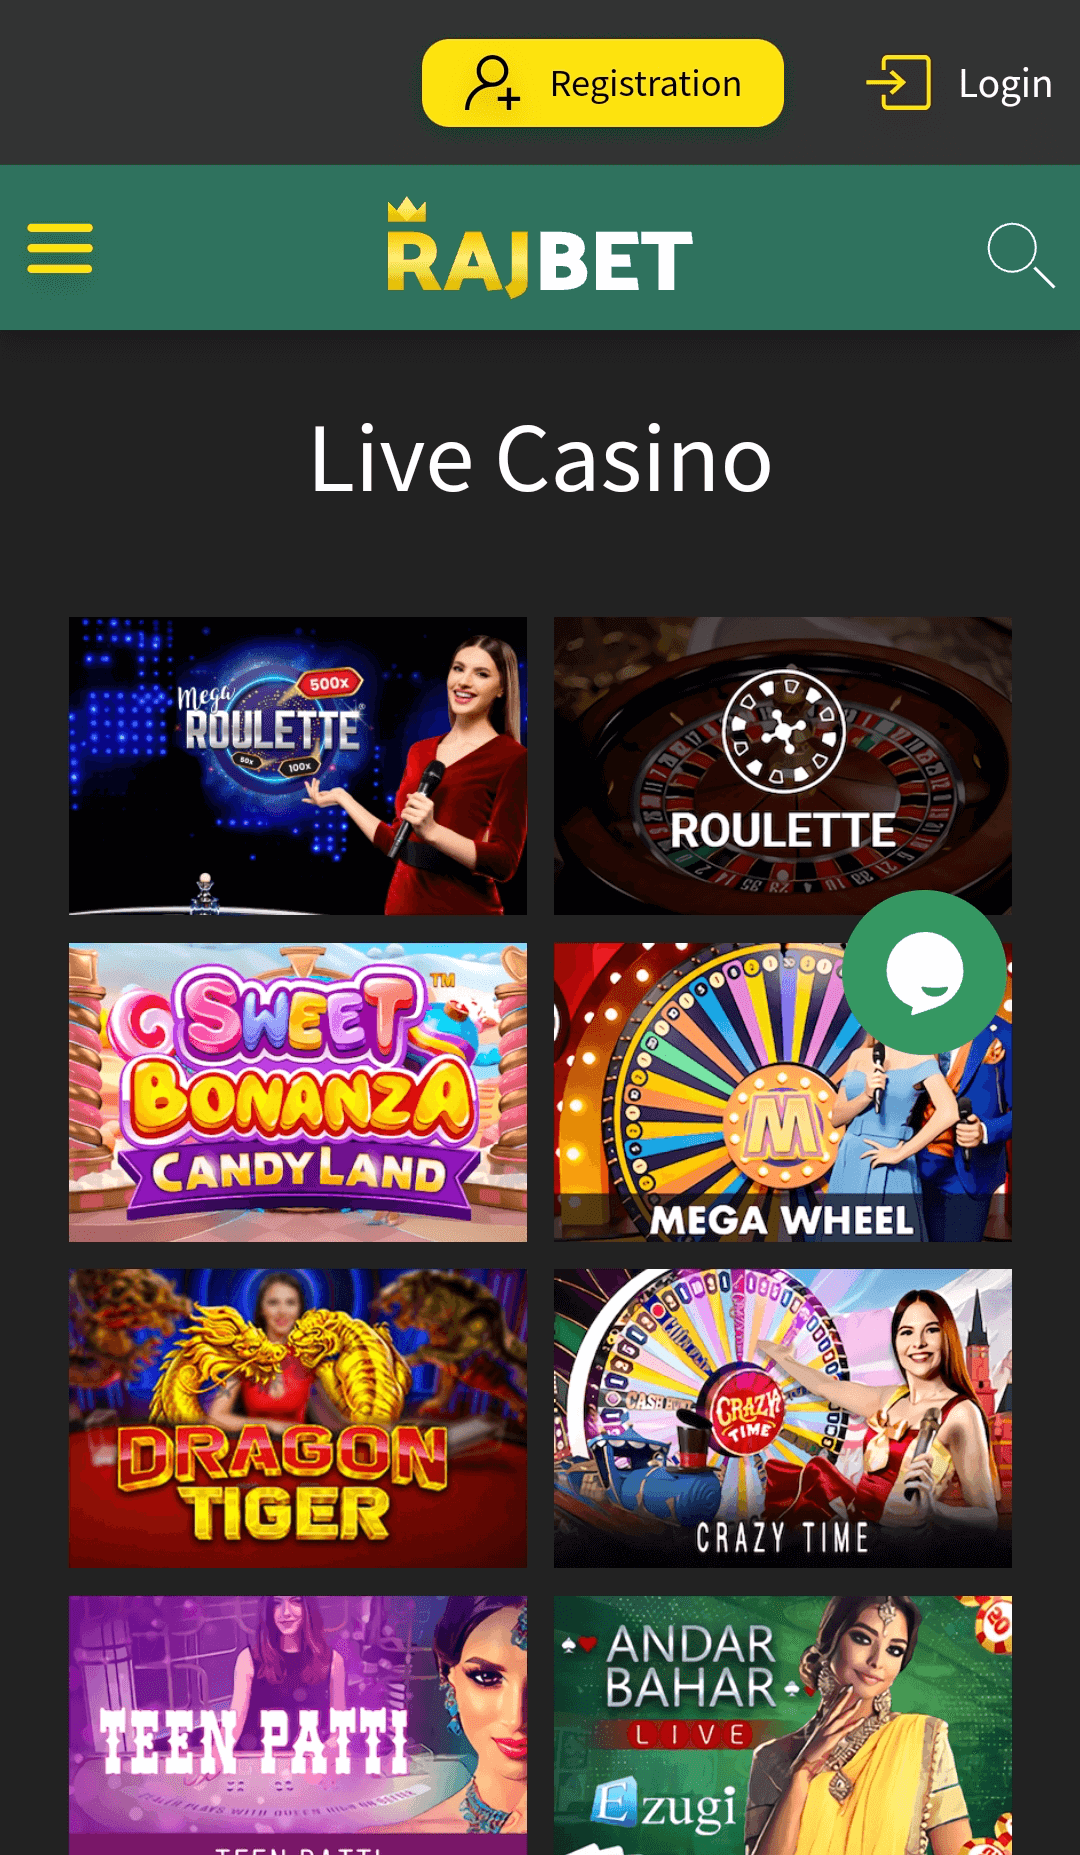 Live casino section at Rajbet app